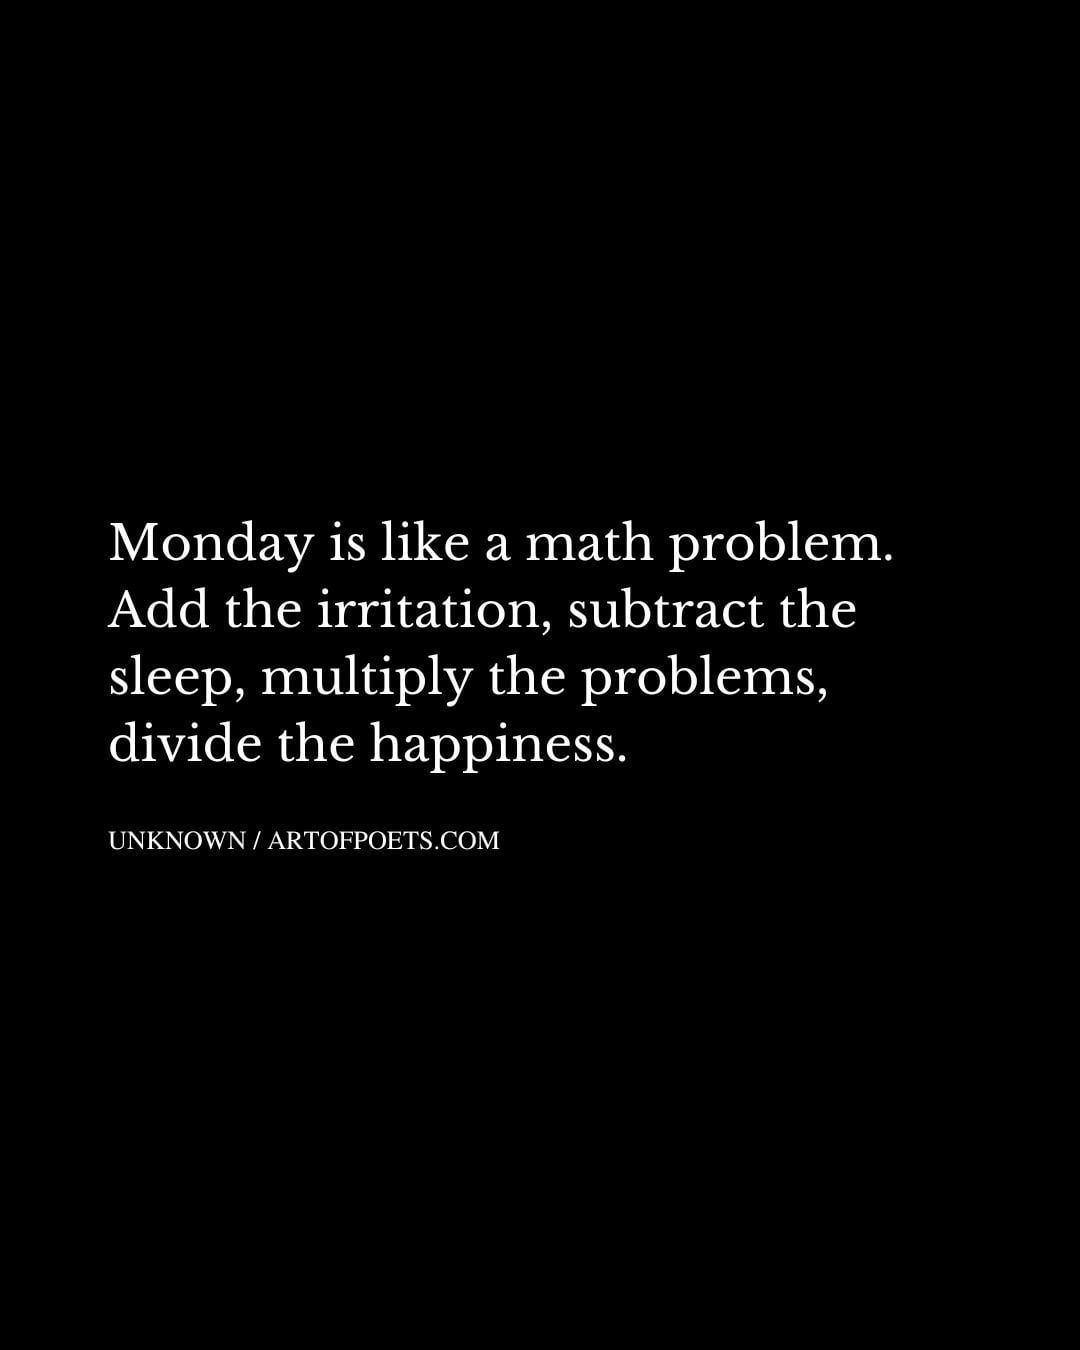 Monday is like a math problem. Add the irritation subtract the sleep multiply the problems divide the happiness